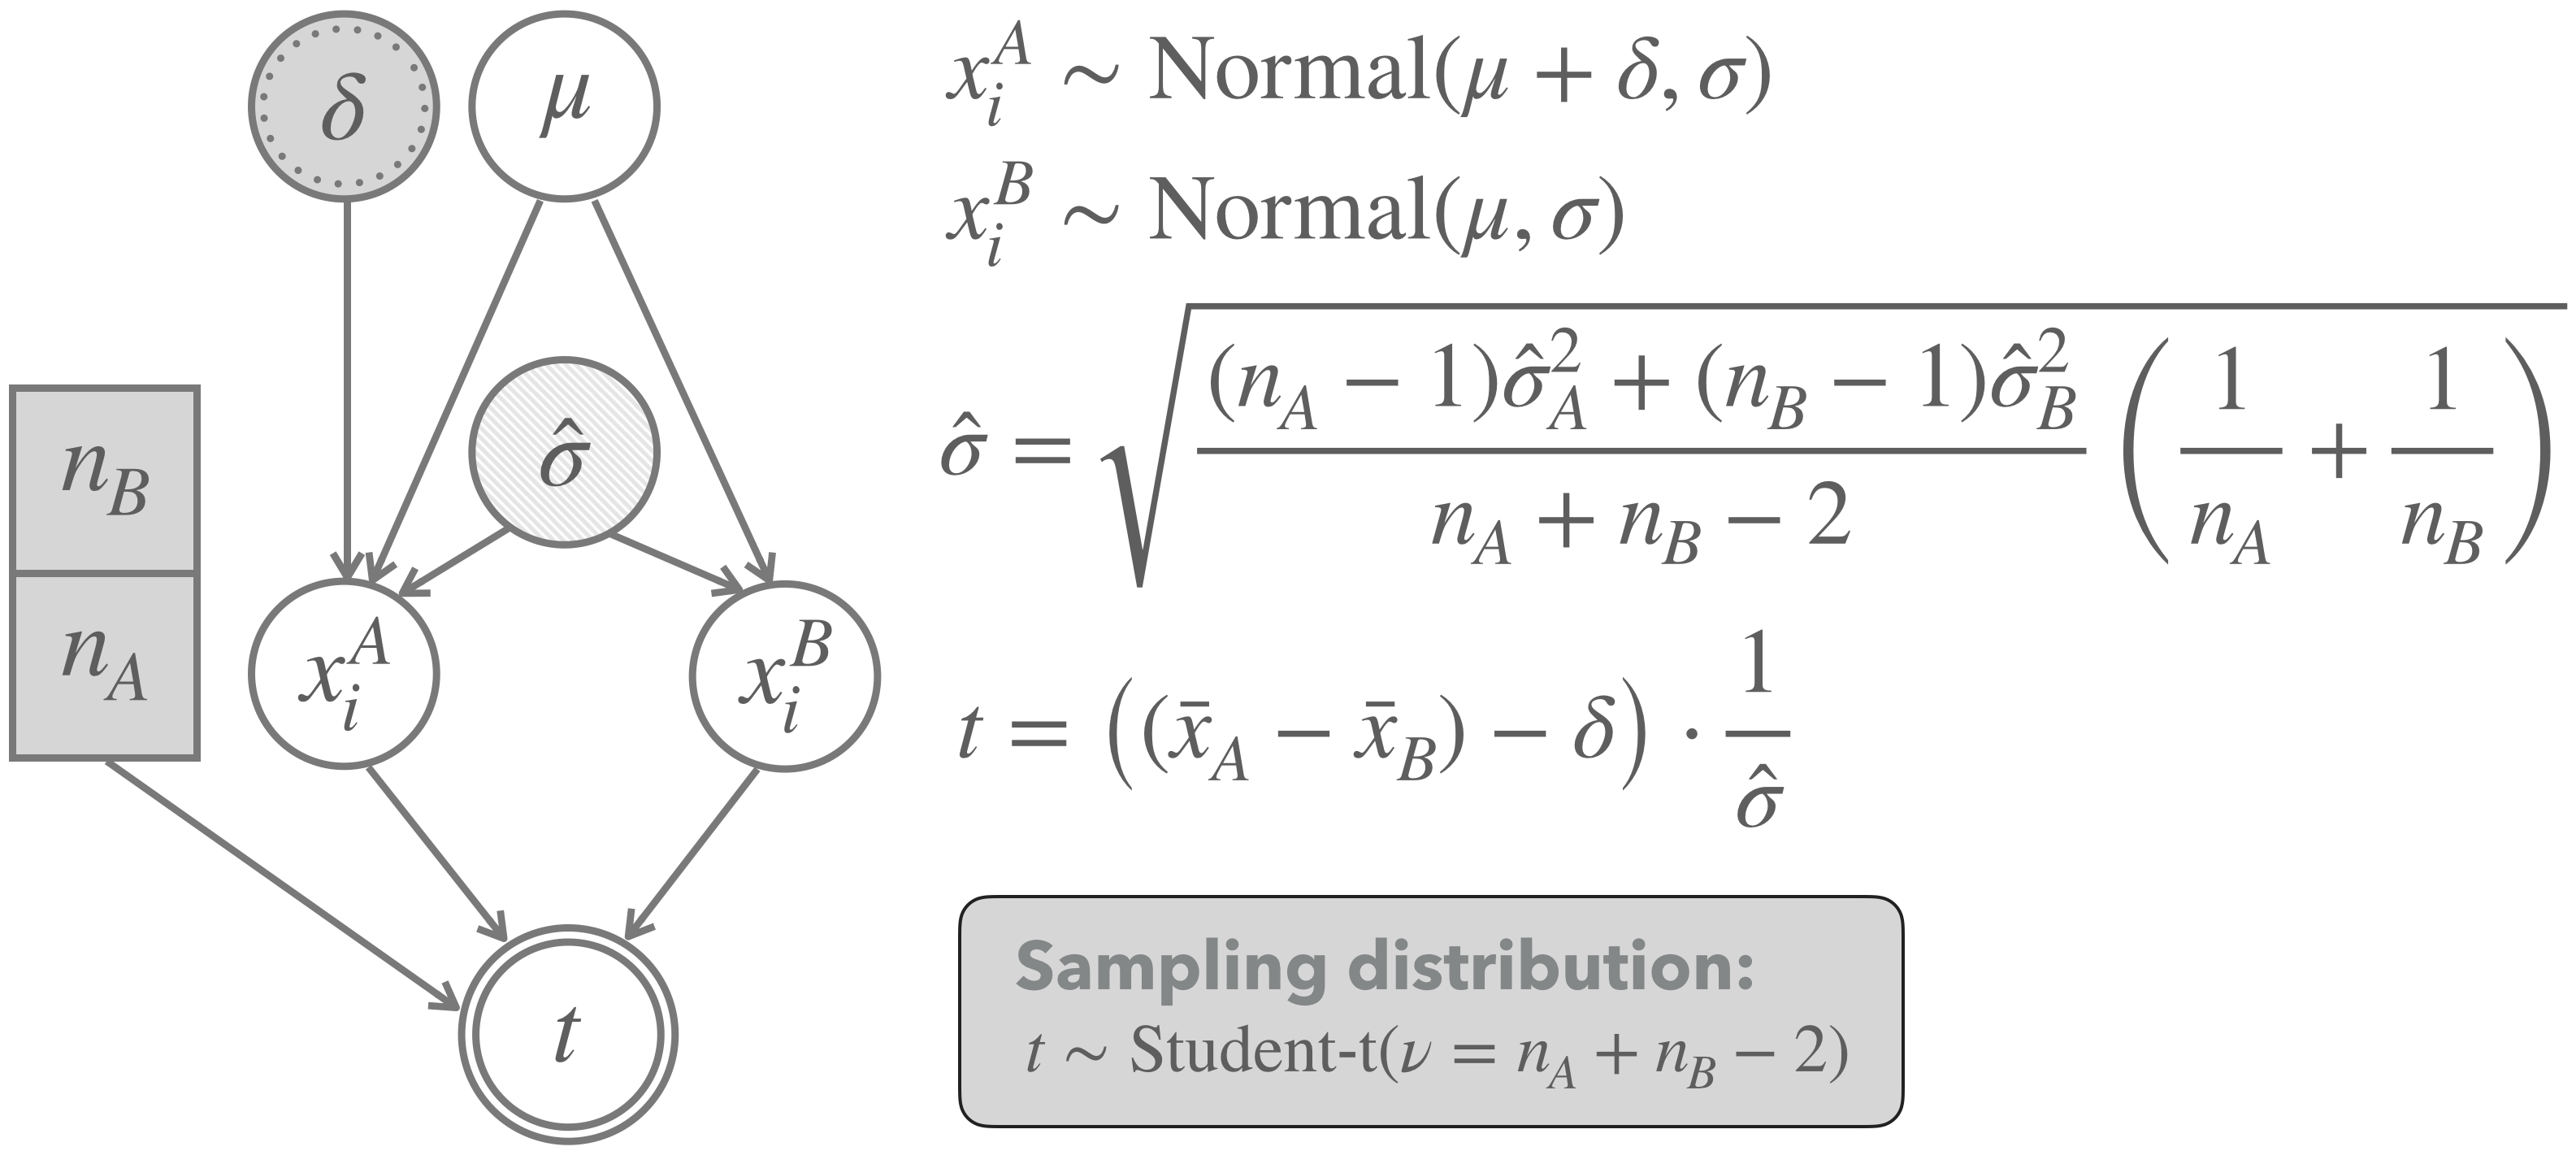 Graphical representation of the model underlying a frequentist two-population $t$-test (for unpaired data with equal variance and unequal sample sizes). Notice that the light shading of the node for the standard deviation indicates that the value for this parameter is estimated from the data.